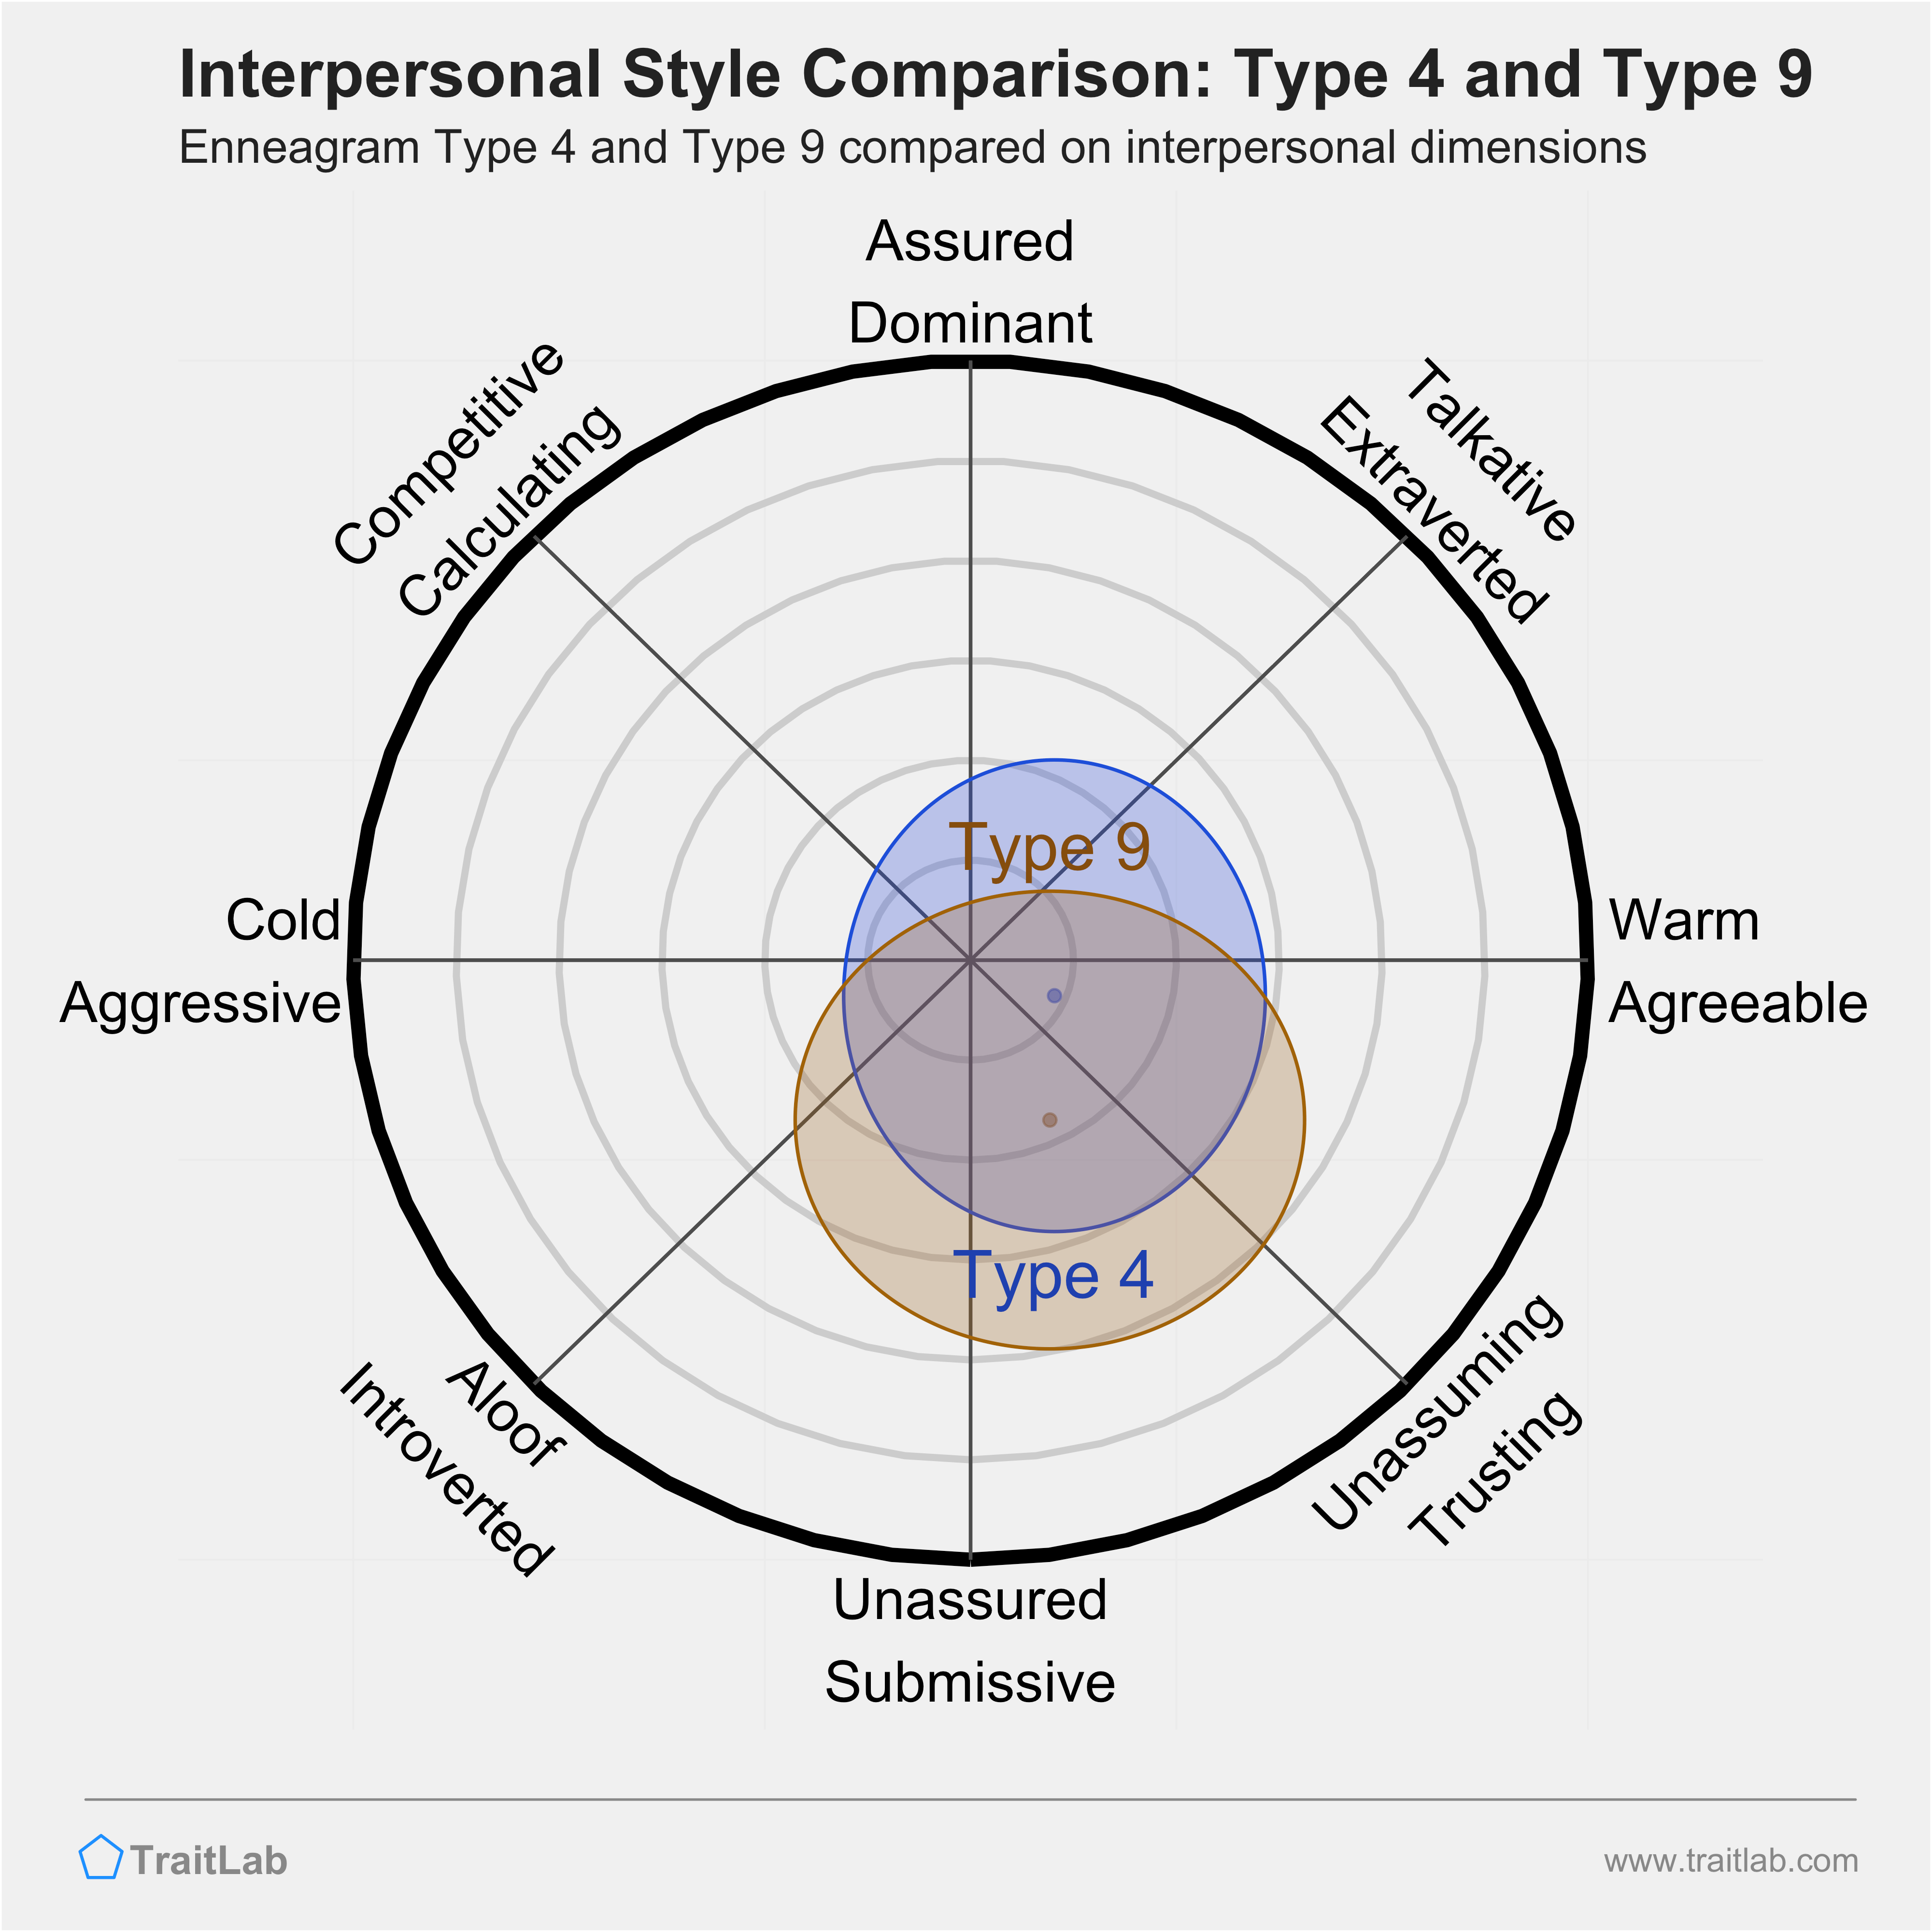 Enneagram Type 4 and Type 9 comparison across interpersonal dimensions